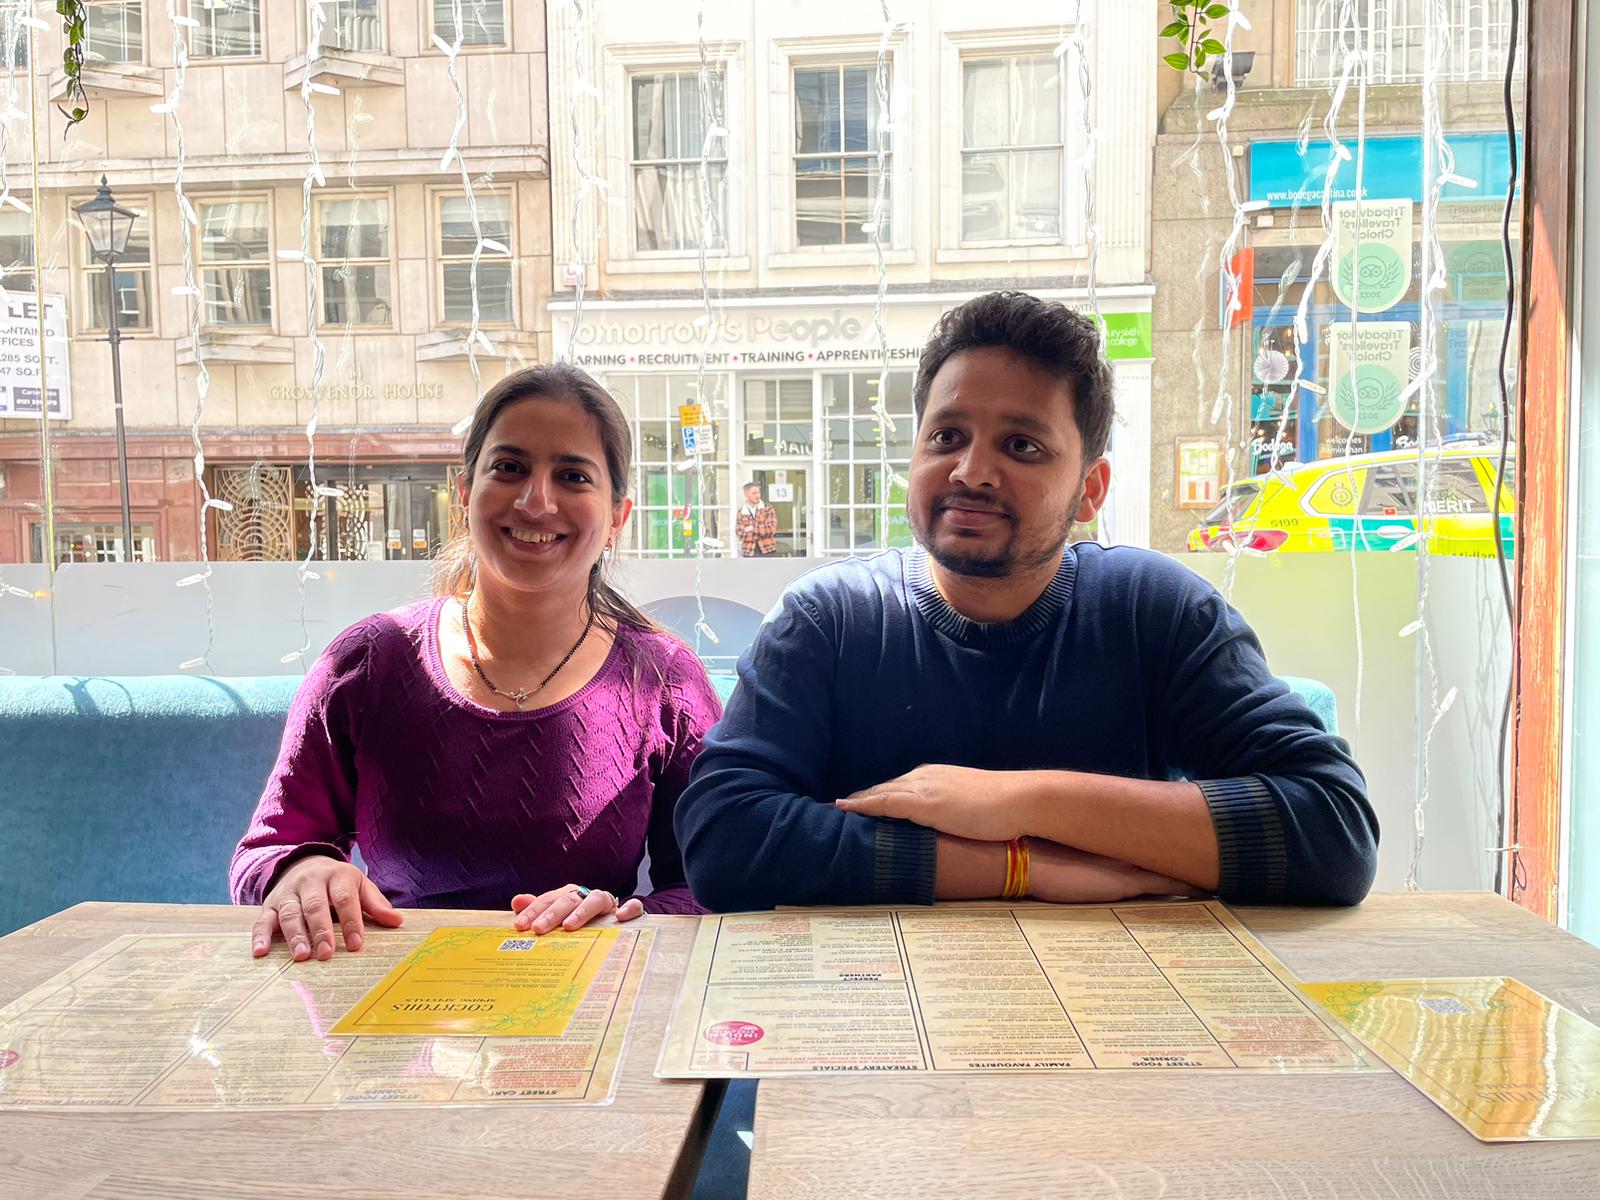 Vinay Aggarwal (right) and his wife, Ankita Gulati, said they did not realise William took their booking (Callum Parke/PA)